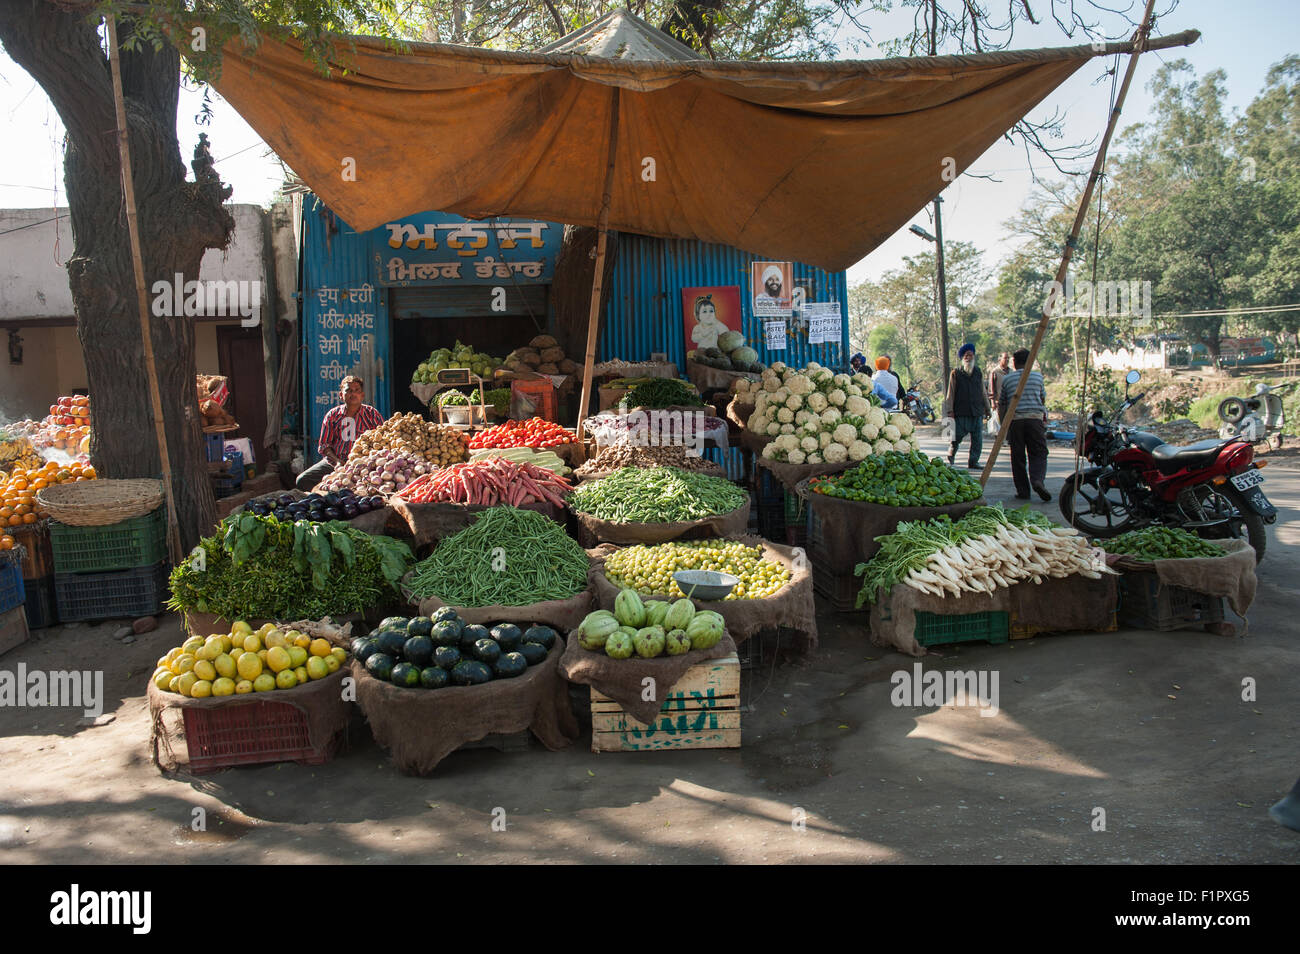 Amritsar, Punjab, India. a roadside market stall selling fruit and vegetables with writing in punjabi script. Stock Photo